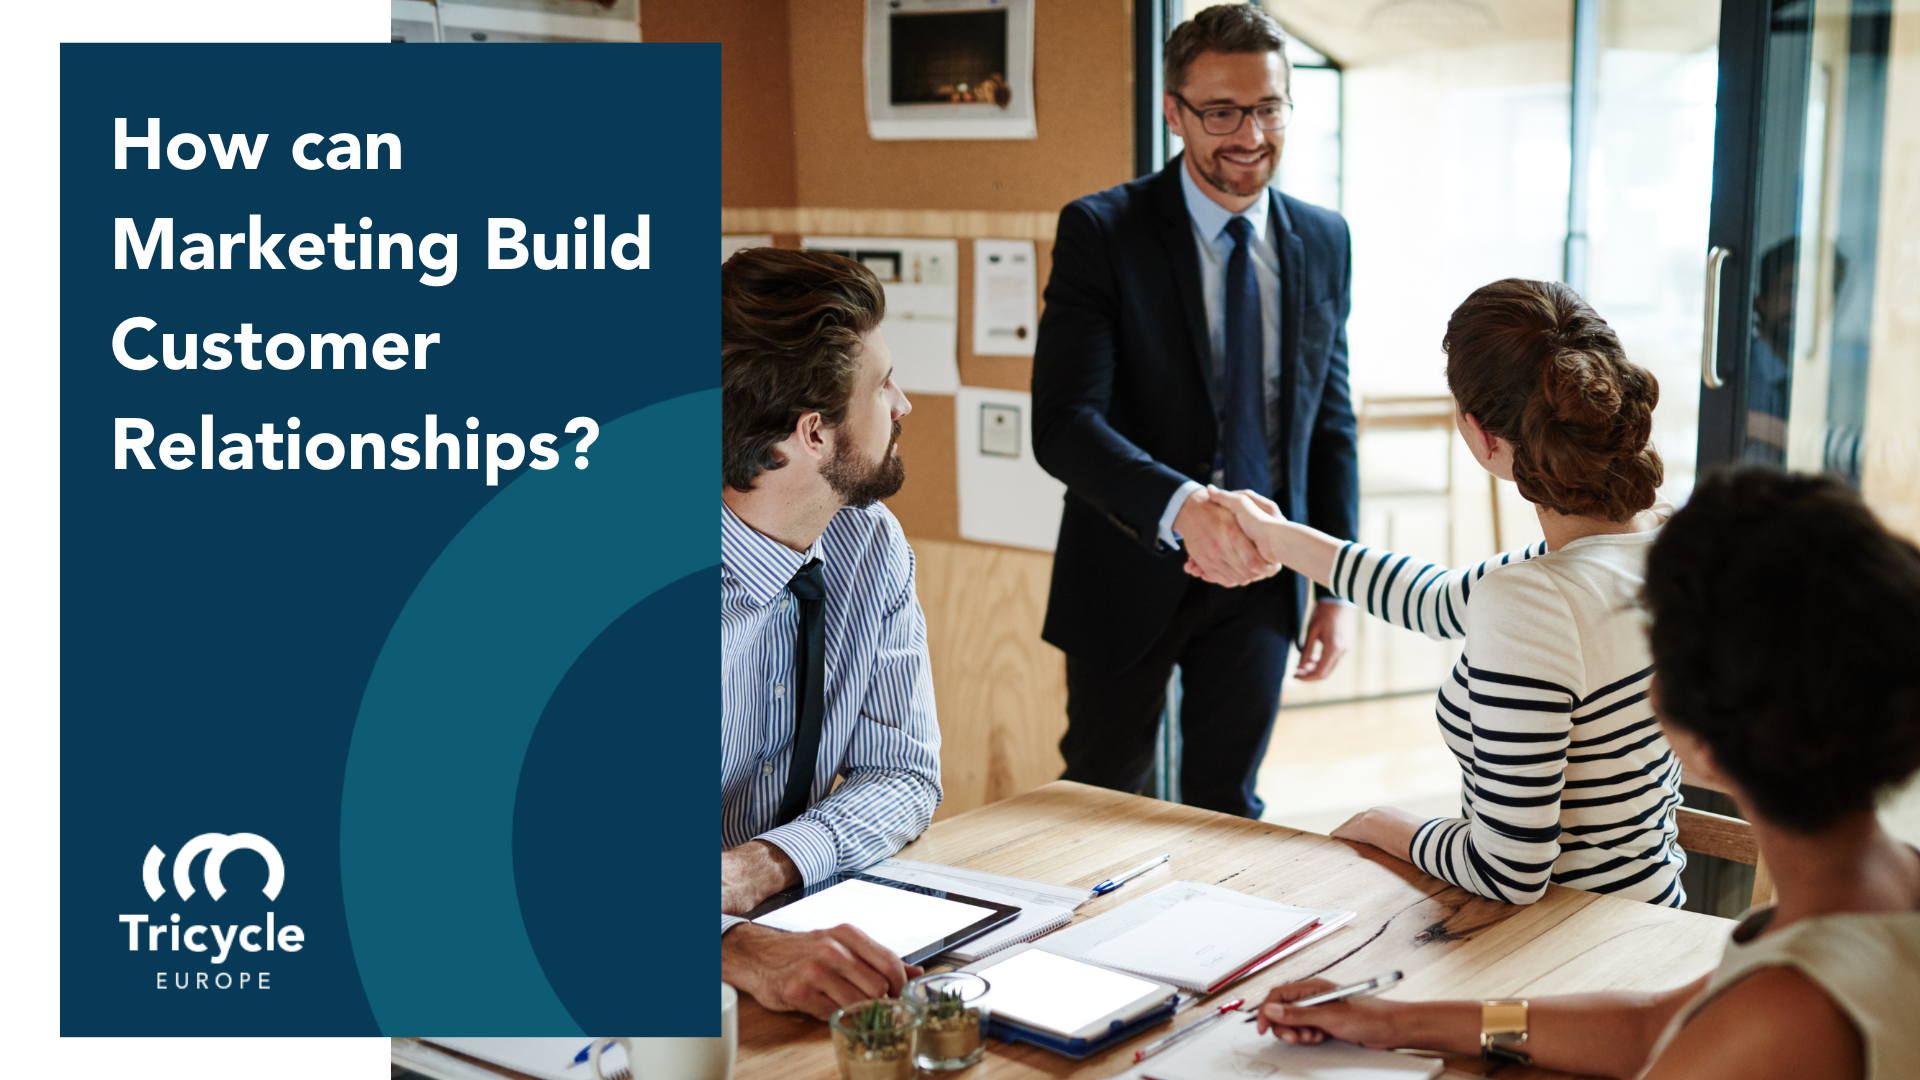 How can Marketing Build Customer Relationships?